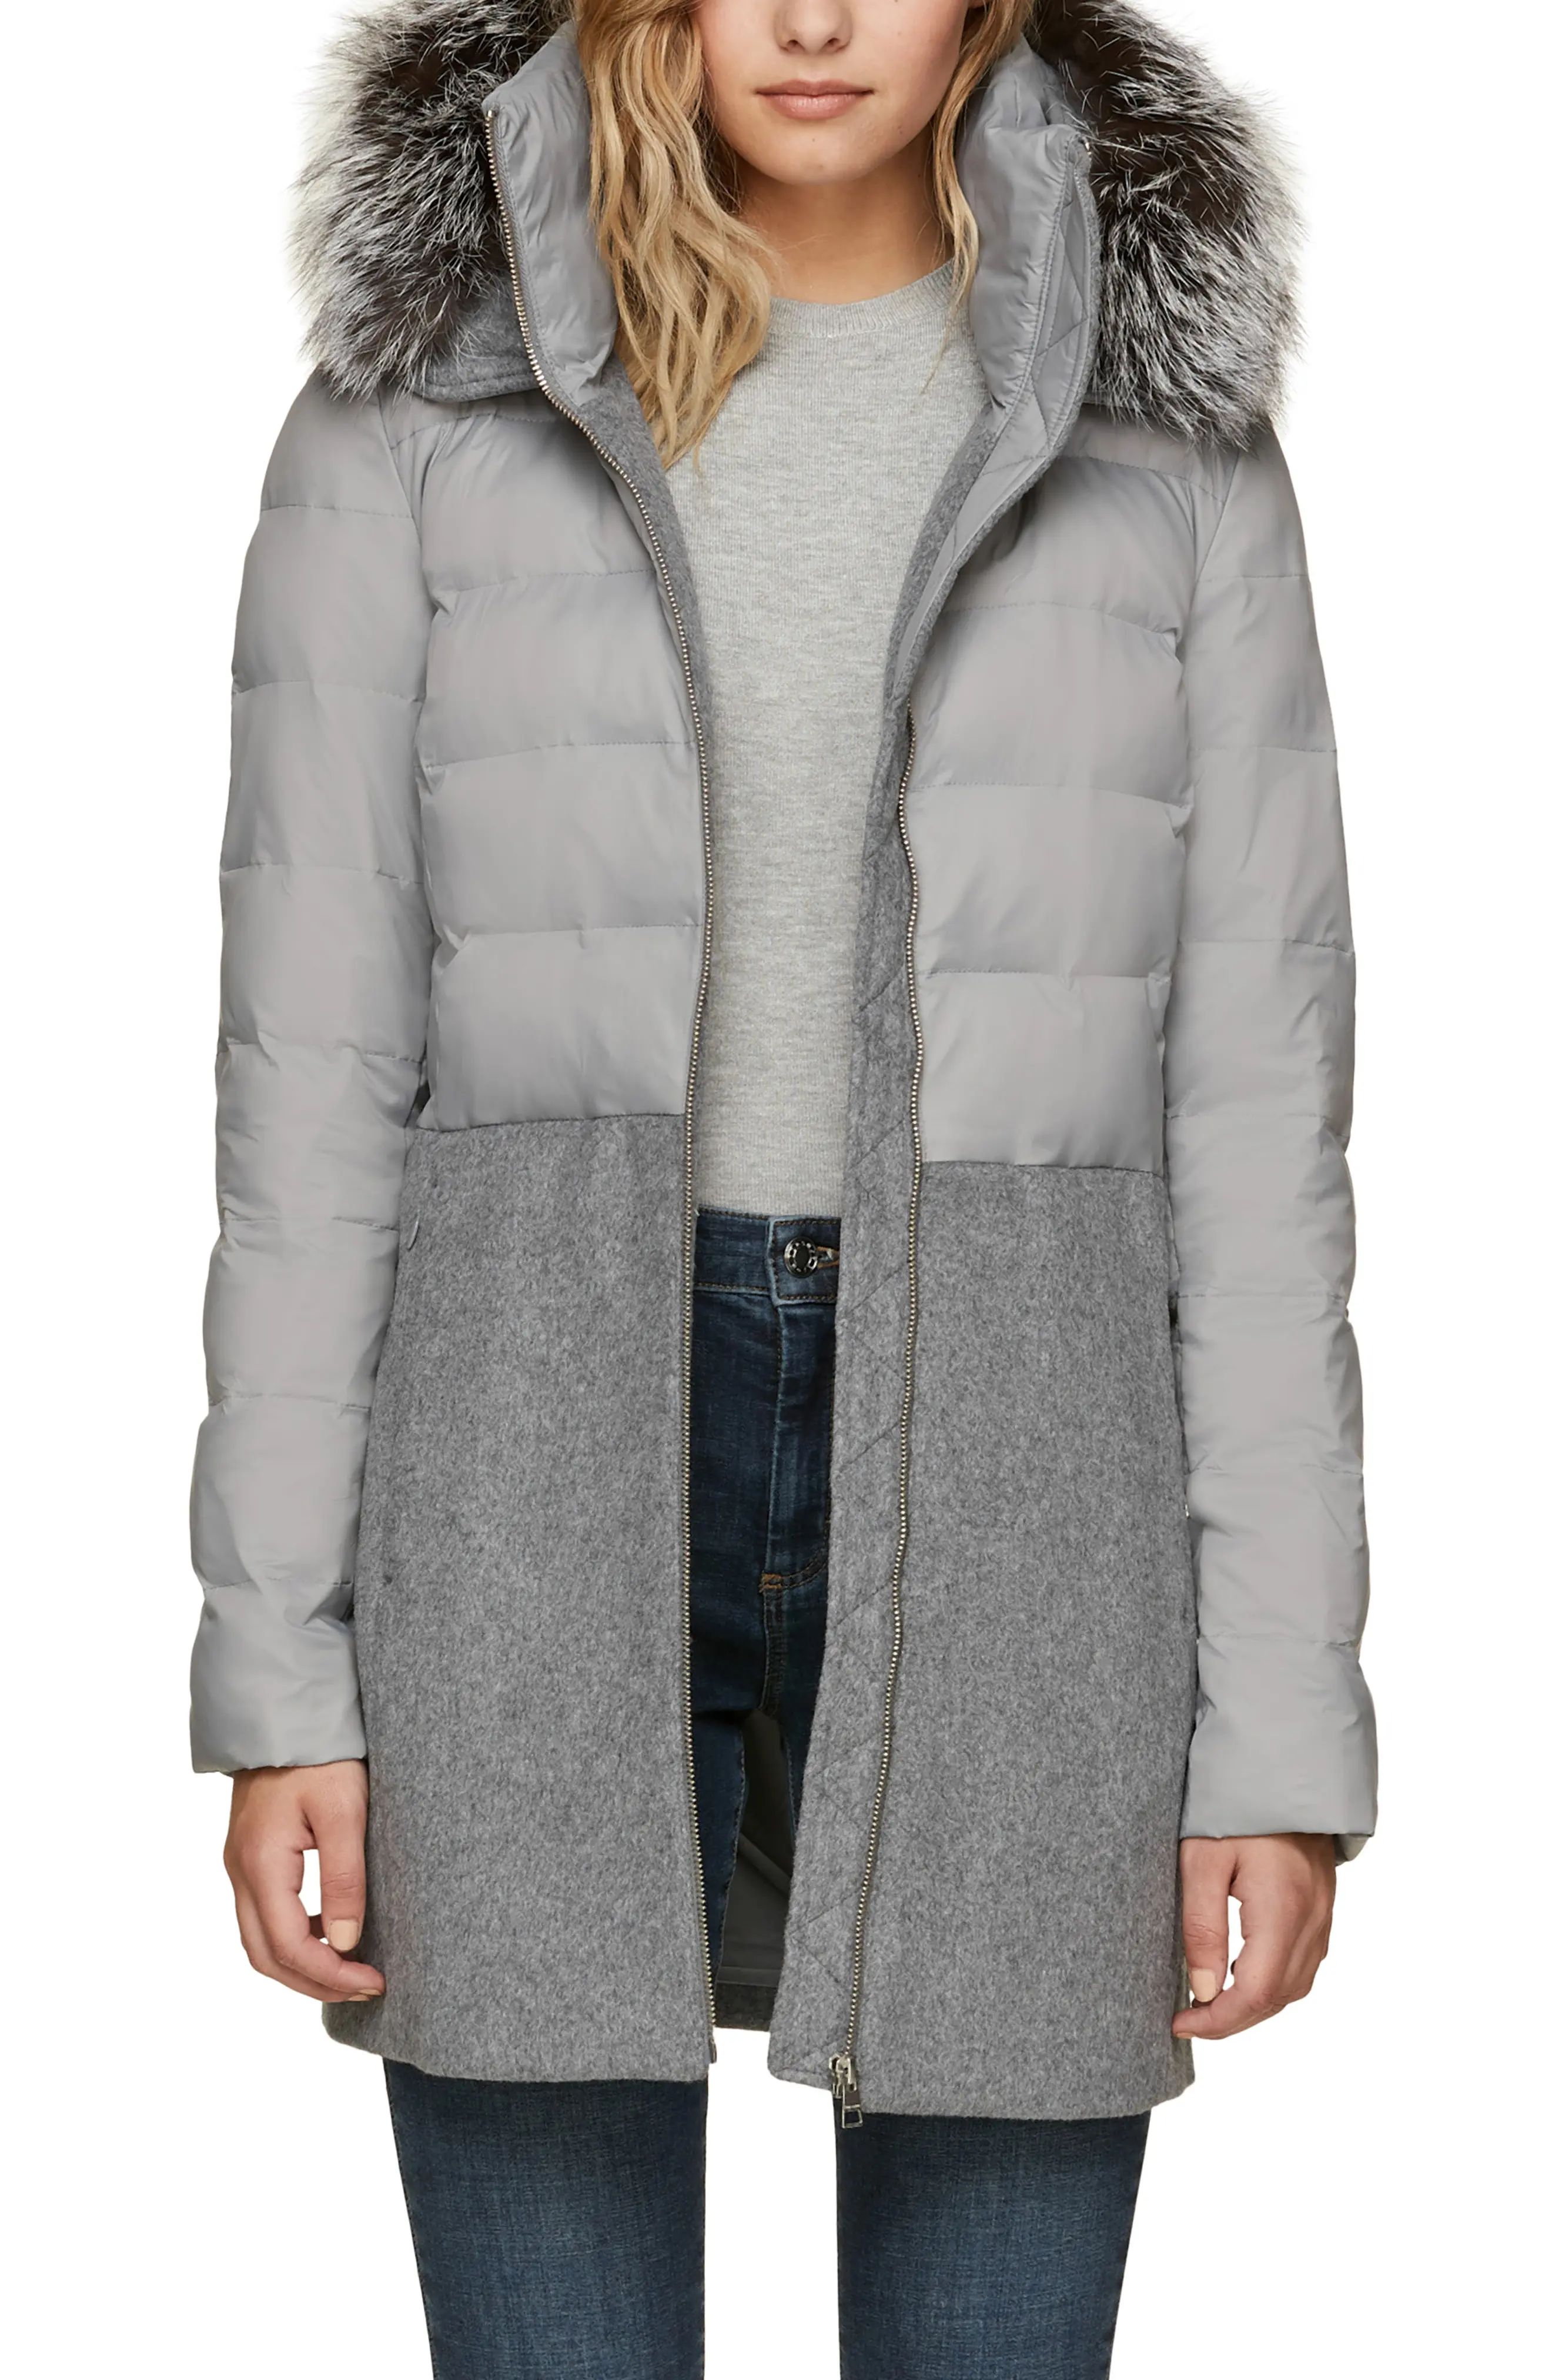 Soia & Kyo Straight Fit Mixed Media Coat with Genuine Silver Fox Fur Trim | Nordstrom